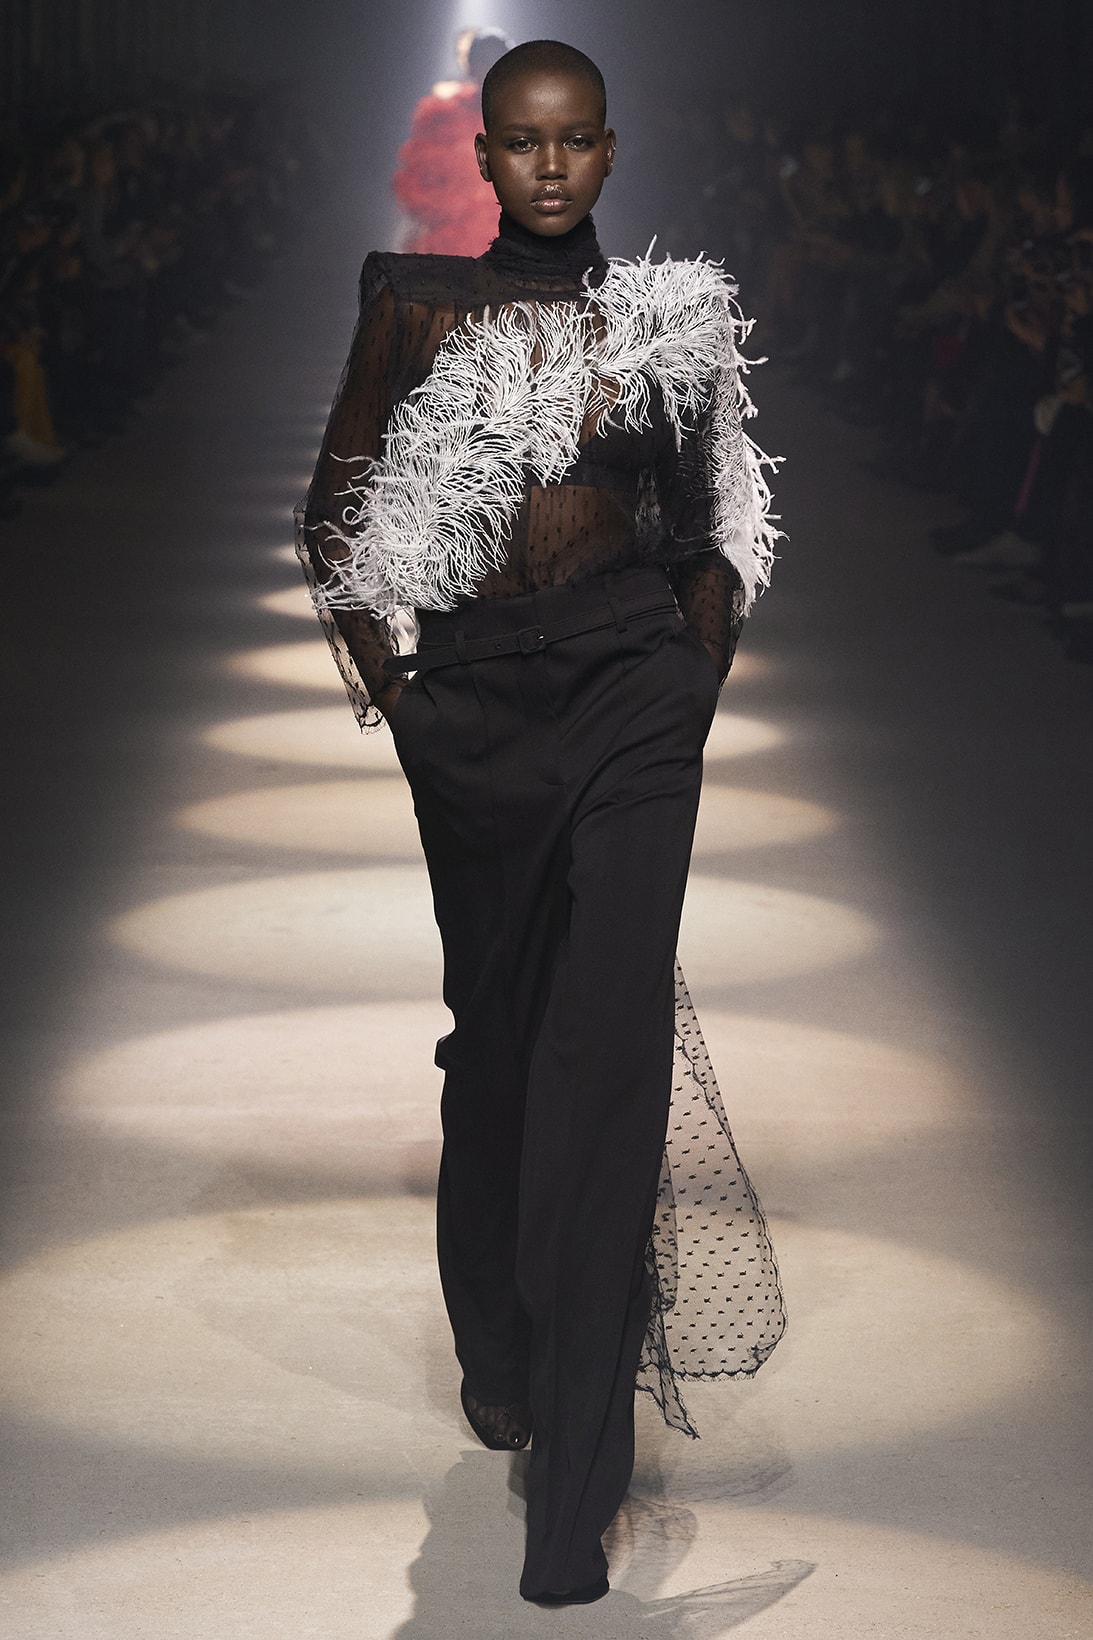 givenchy paris fashion week fall winter womens collection clare waight keller runway show kaia gerber adut akech red black white gown pants shirred blouse